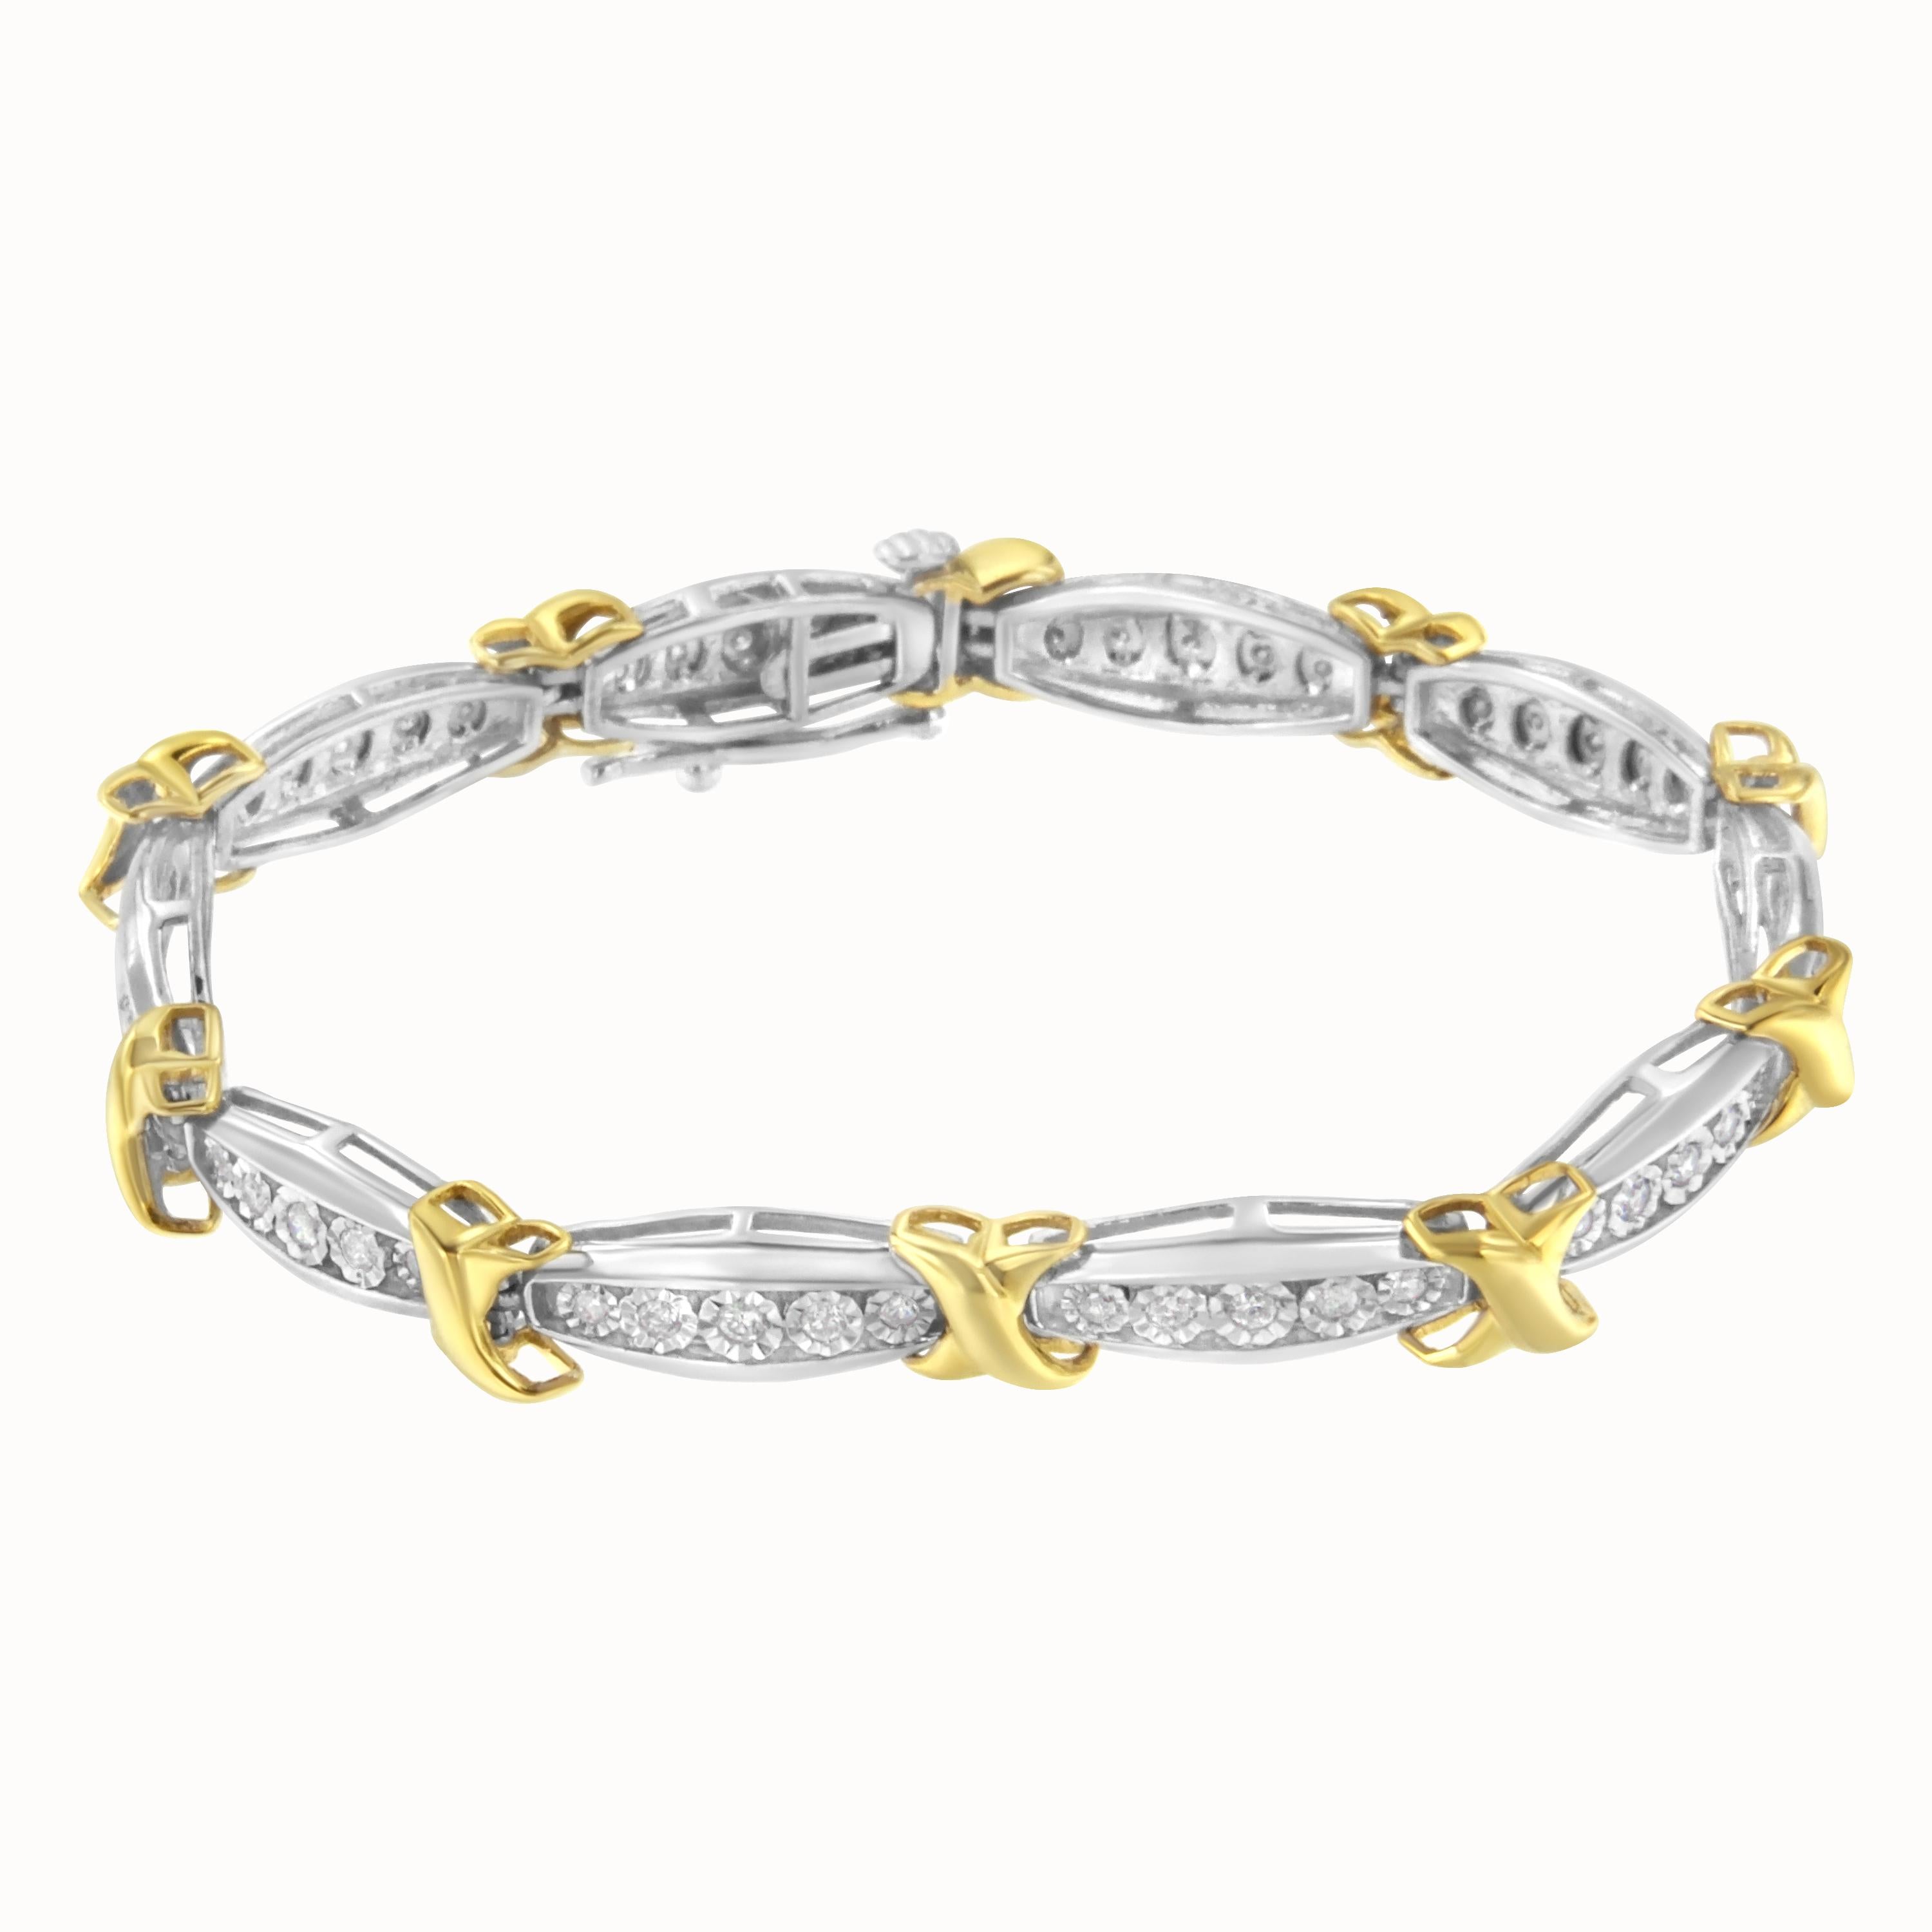 Elegant and timeless, this gorgeous 10K yellow gold coated sterling silver link bracelet features 3/4 carat total weight of round cut diamonds. The tennis bracelet features X shaped links along with an elongated oval link set with 0.75 carat total